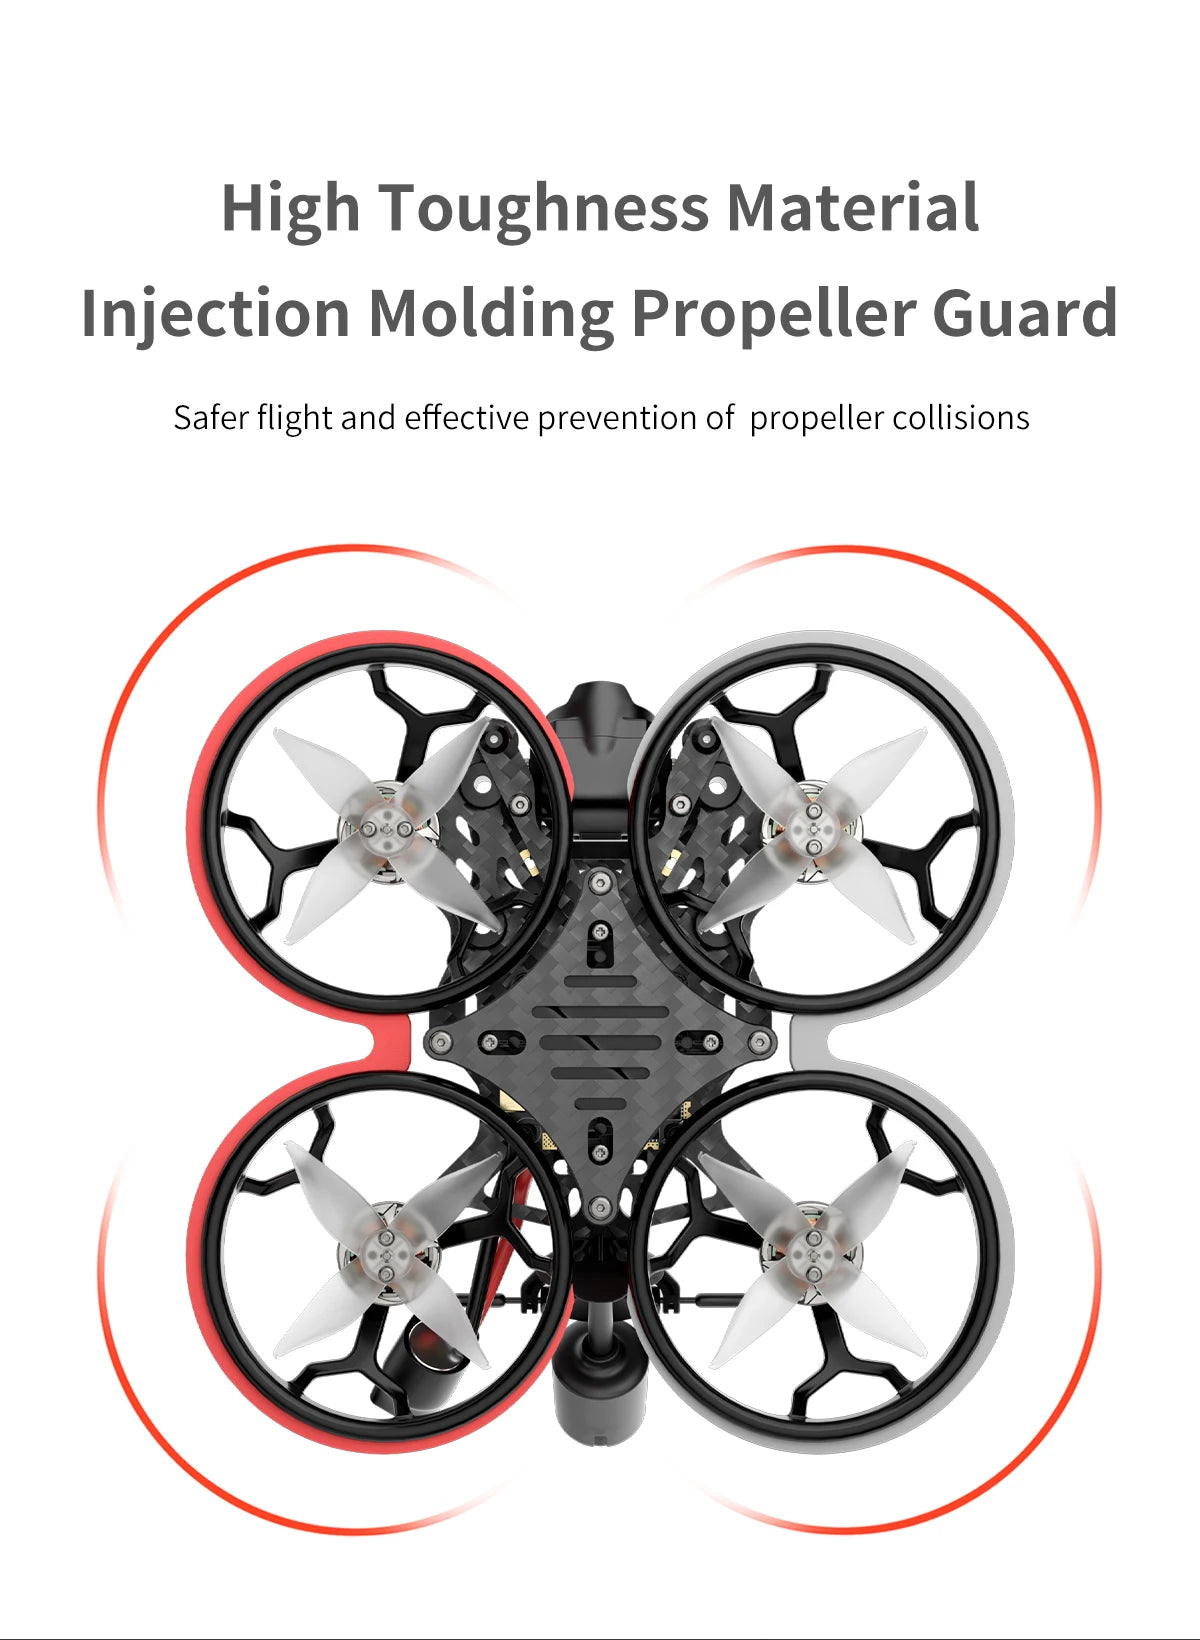 GEPRC Cinelog20 HD - O3 AIR Unit  FPV, GEPRC Cinelog20 HD, High Toughness Material Injection Molding Propeller Guard Safer flight and effective prevention of